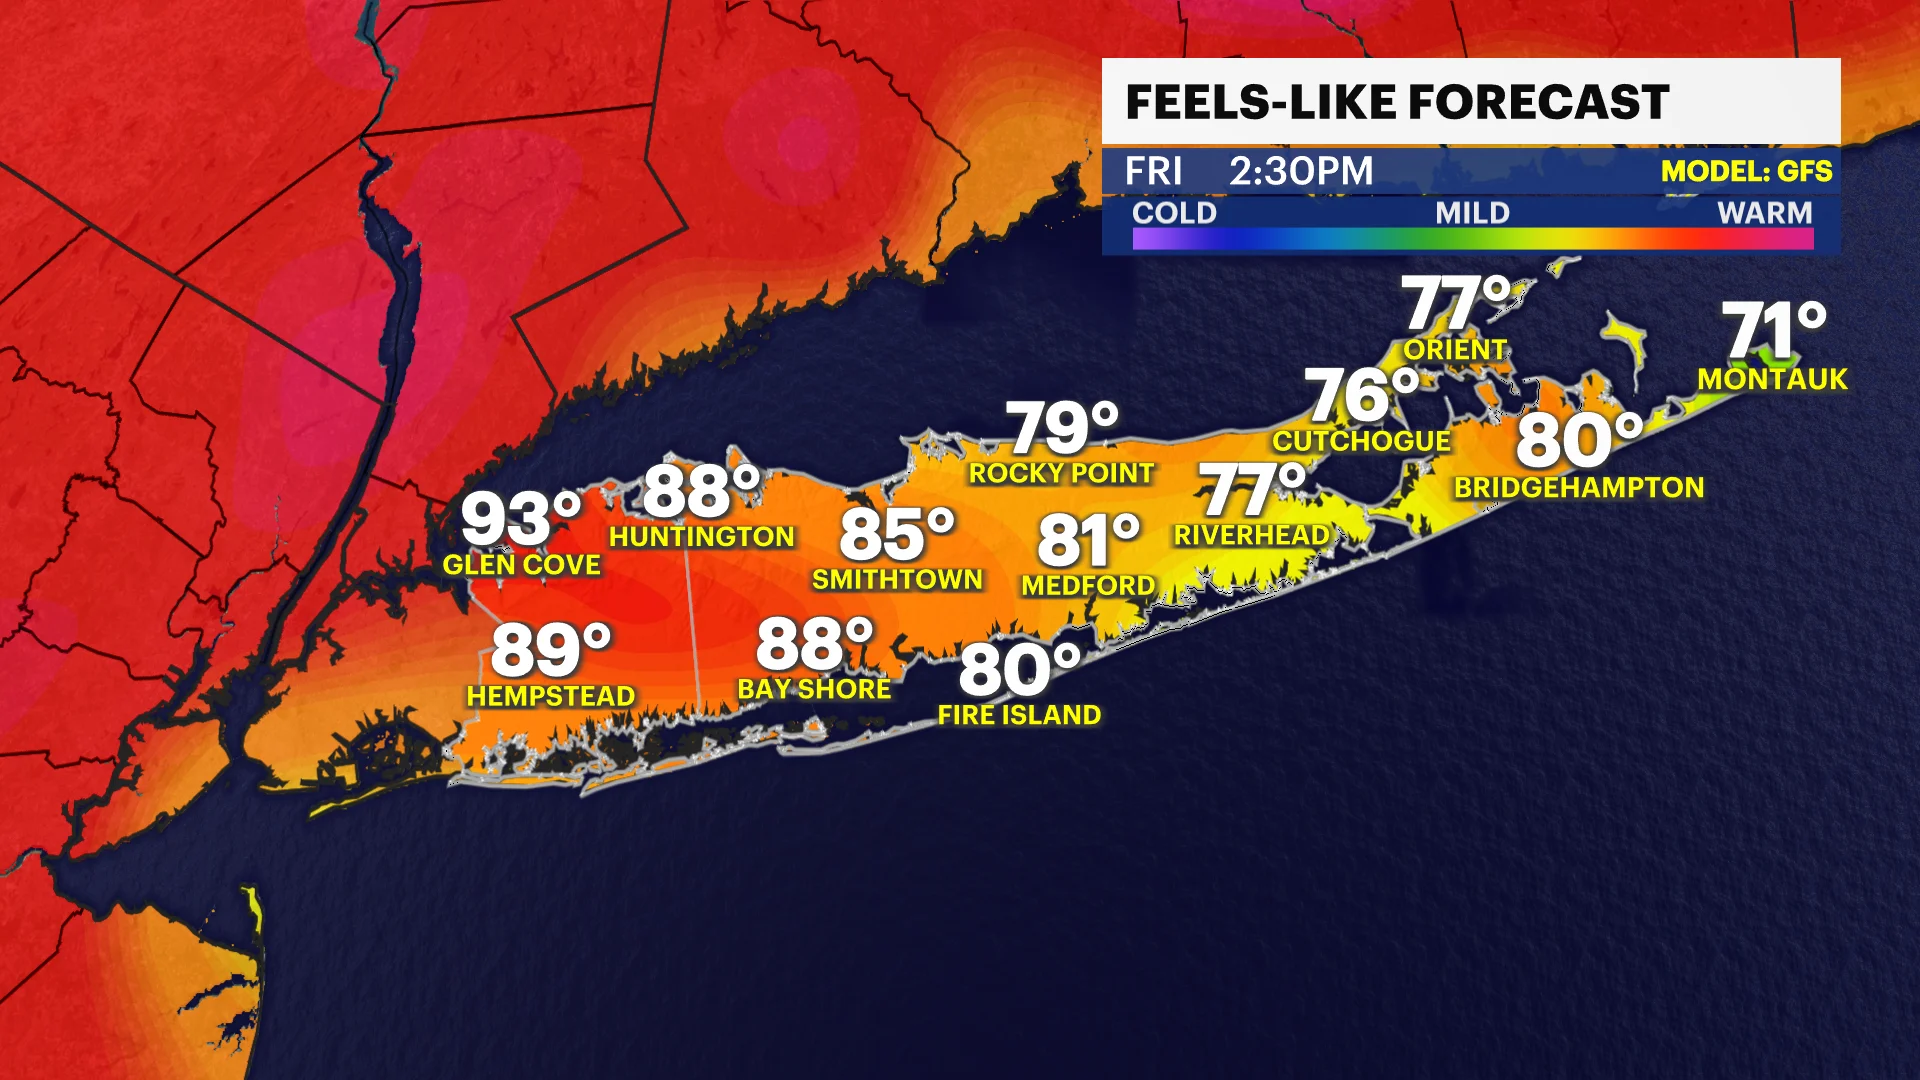 HEAT ALERT: Hot and humid weather moves in Tuesday for Long Island